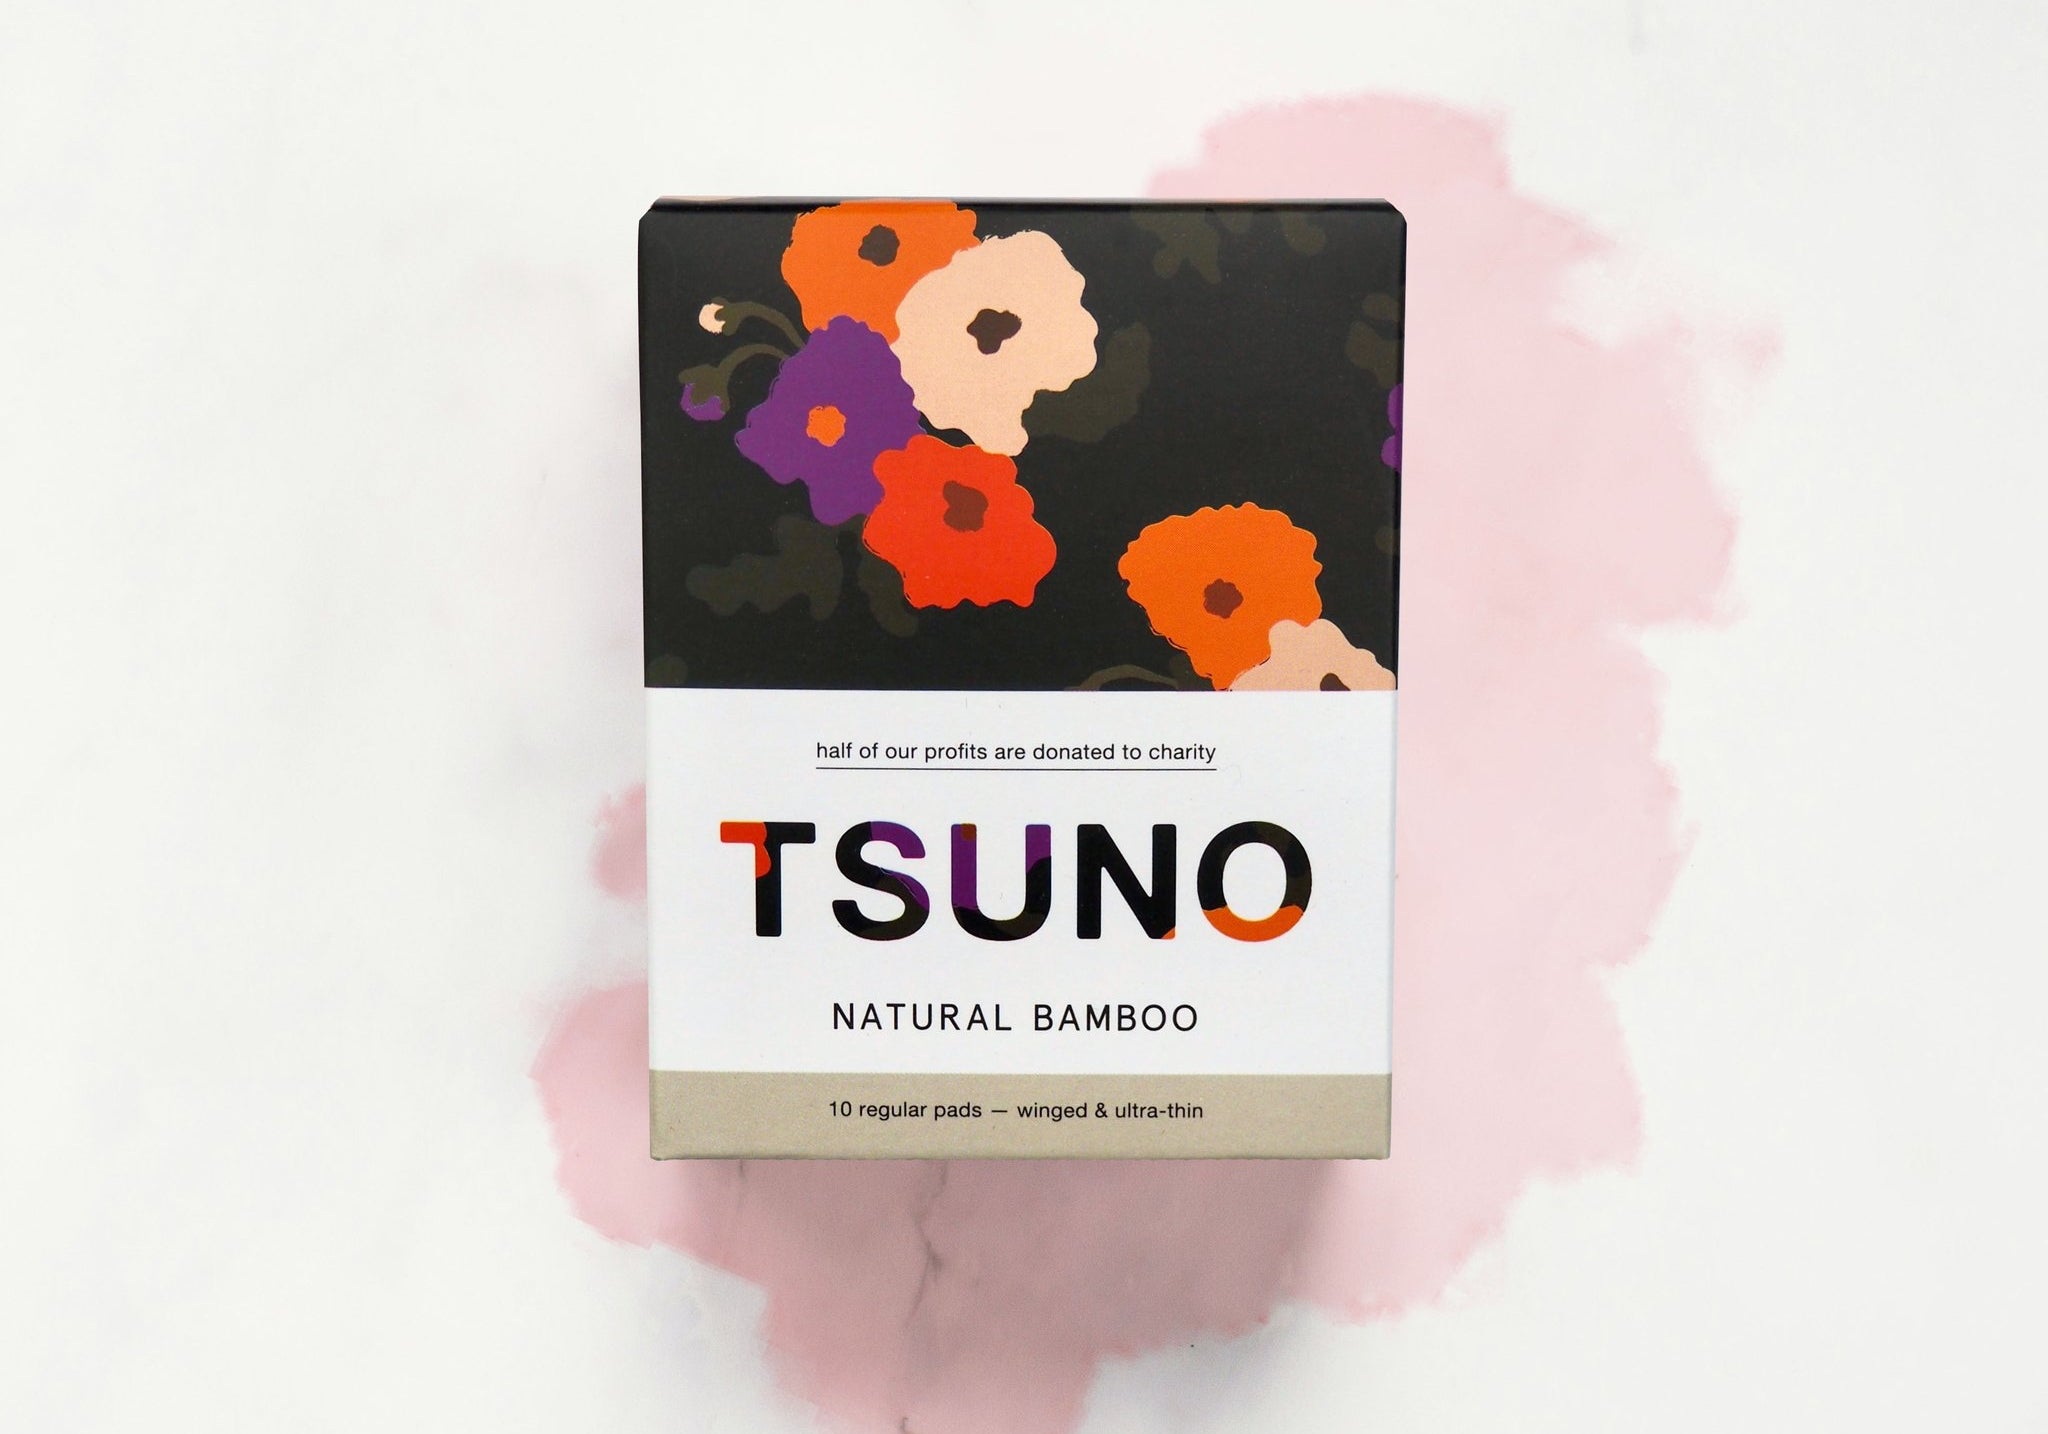 Box of tampons on a pink and white abstract background. The box reads "Tsuno"